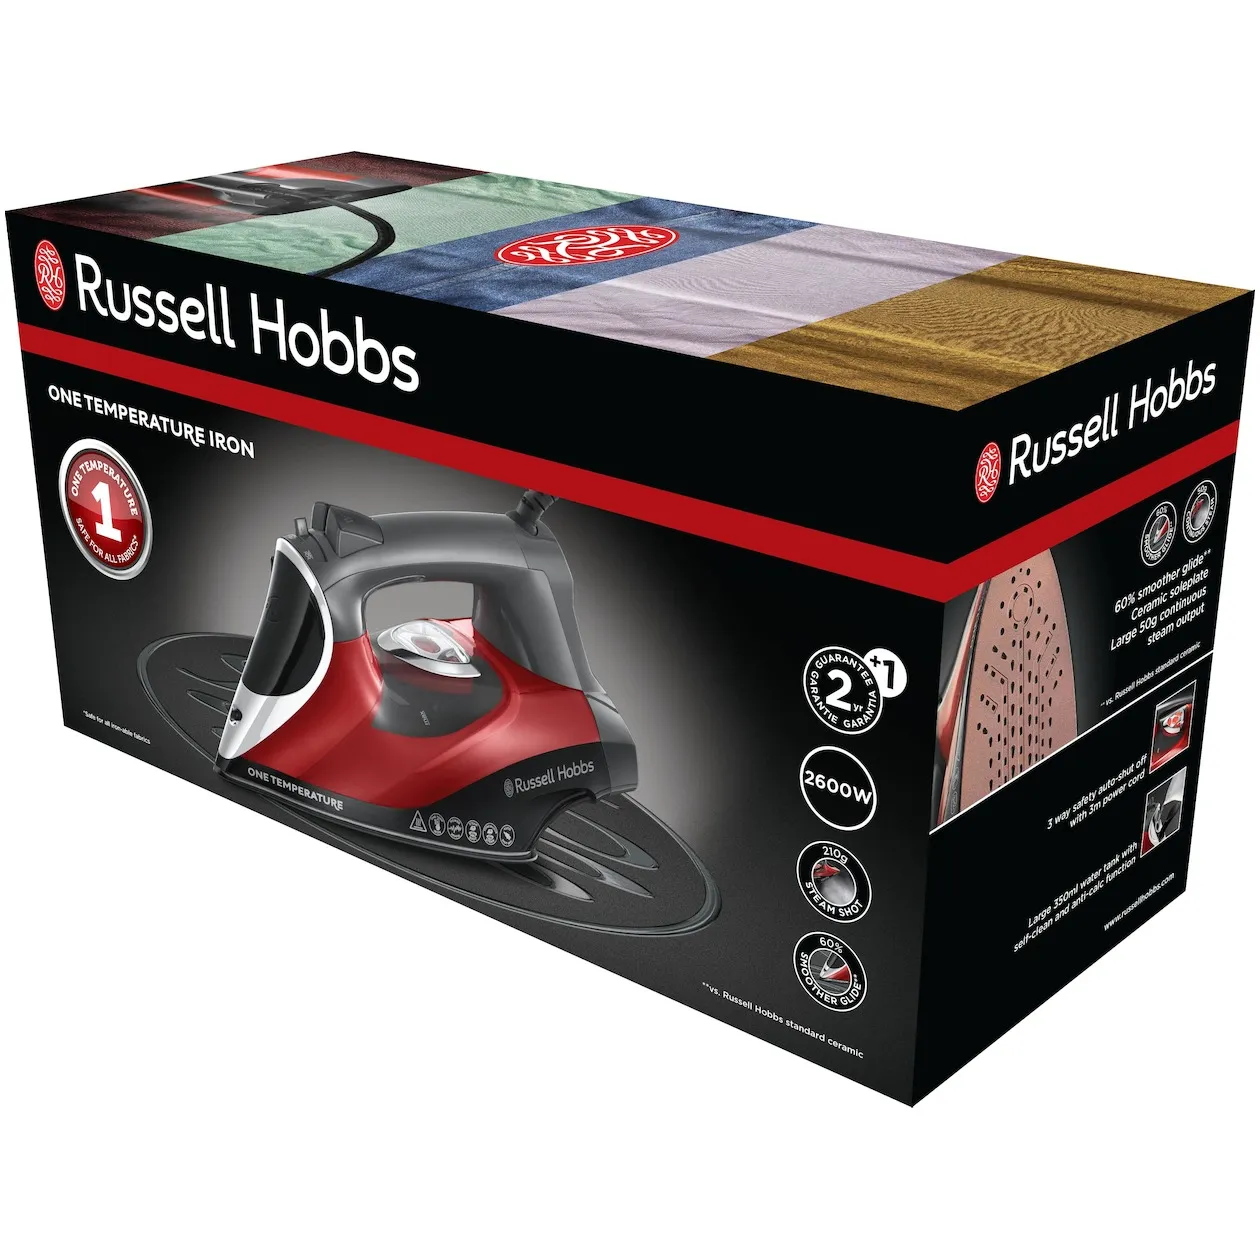 Russell Hobbs ONE TEMPERATURE